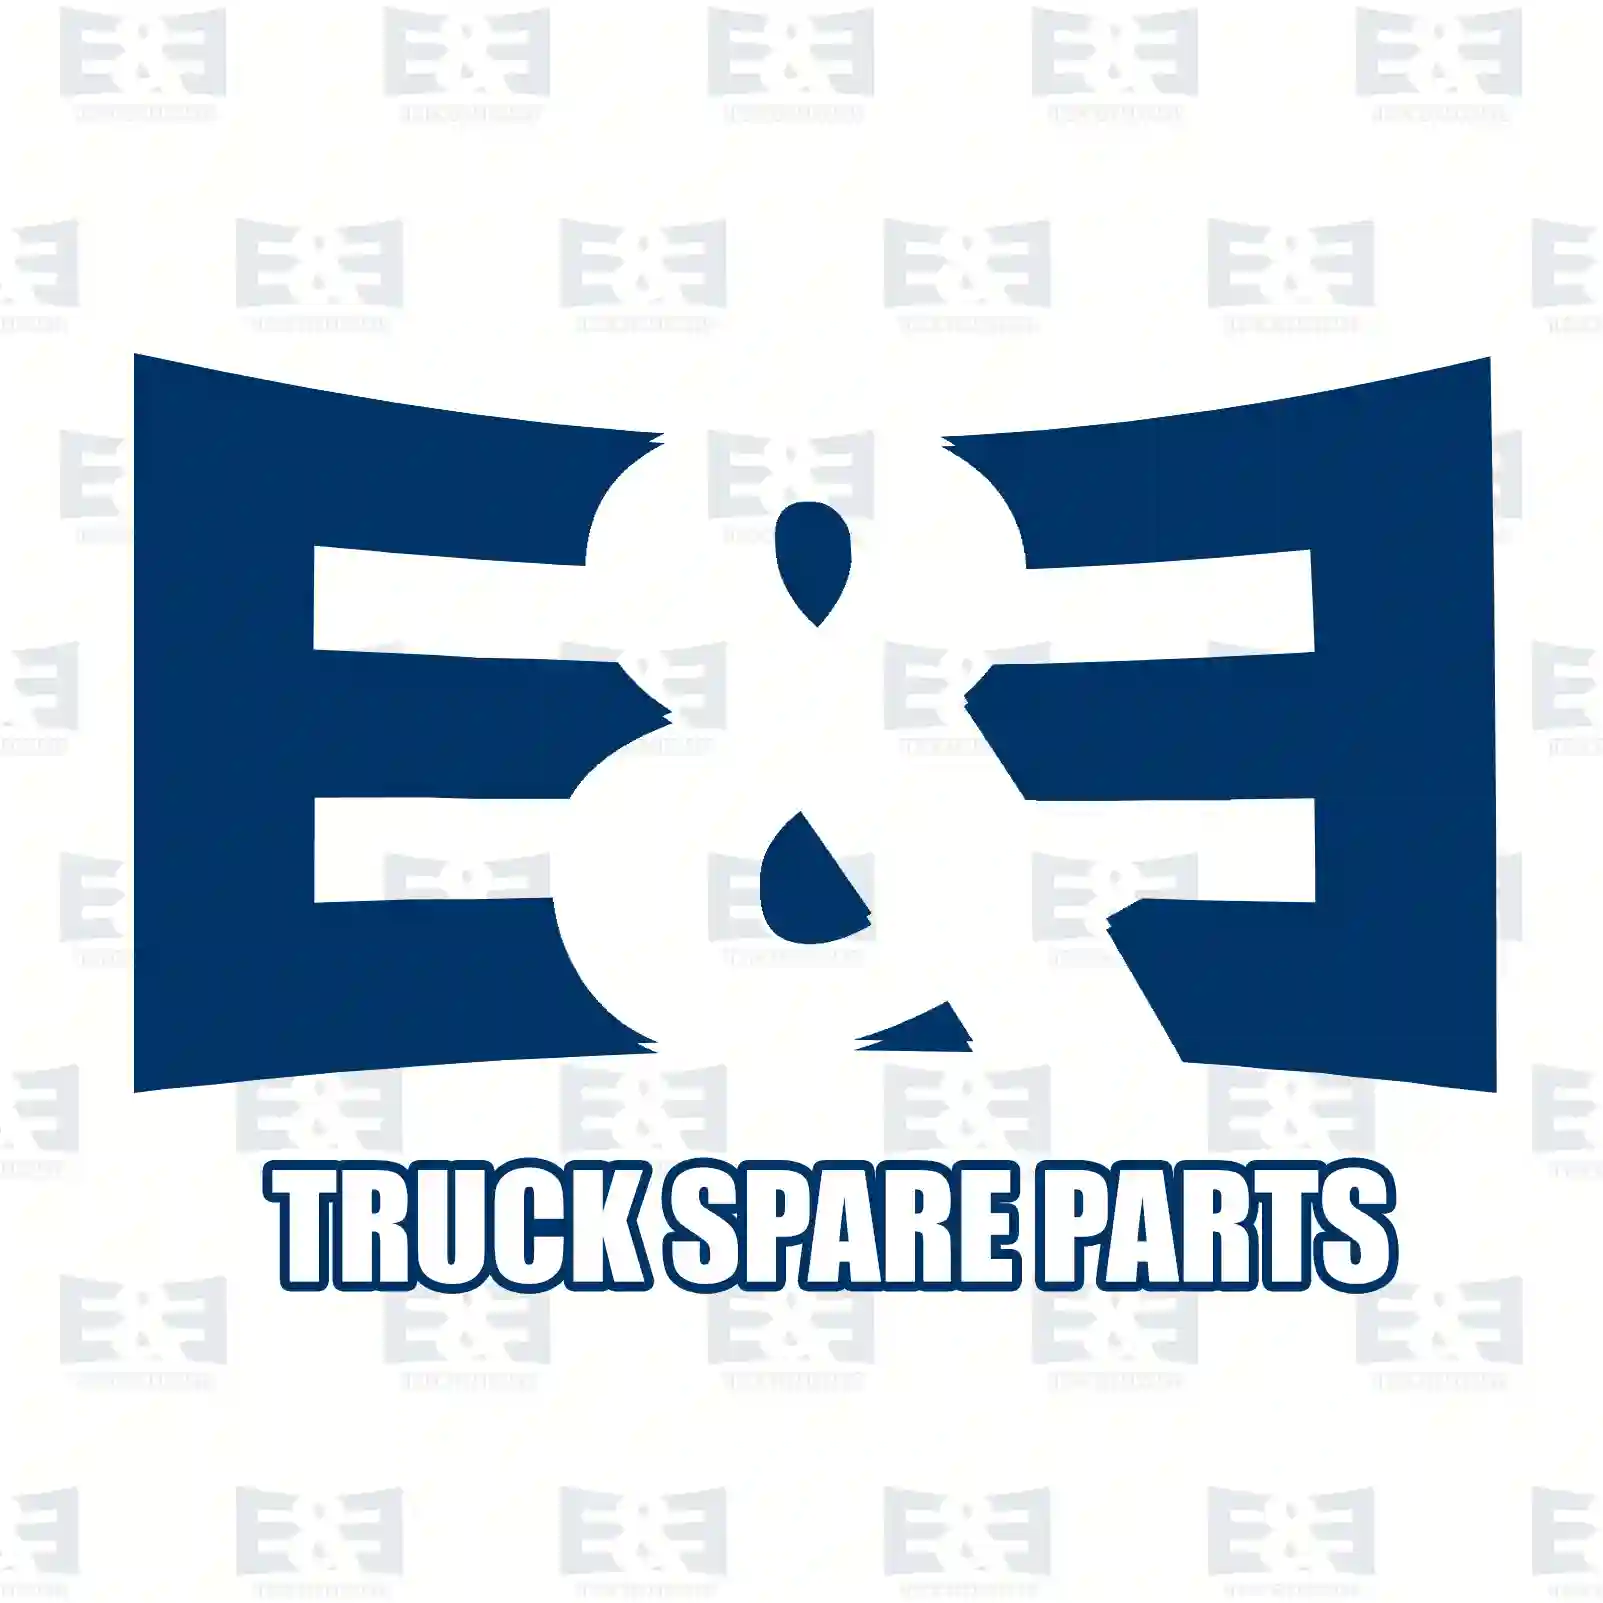  Timing chain kit || E&E Truck Spare Parts | Truck Spare Parts, Auotomotive Spare Parts